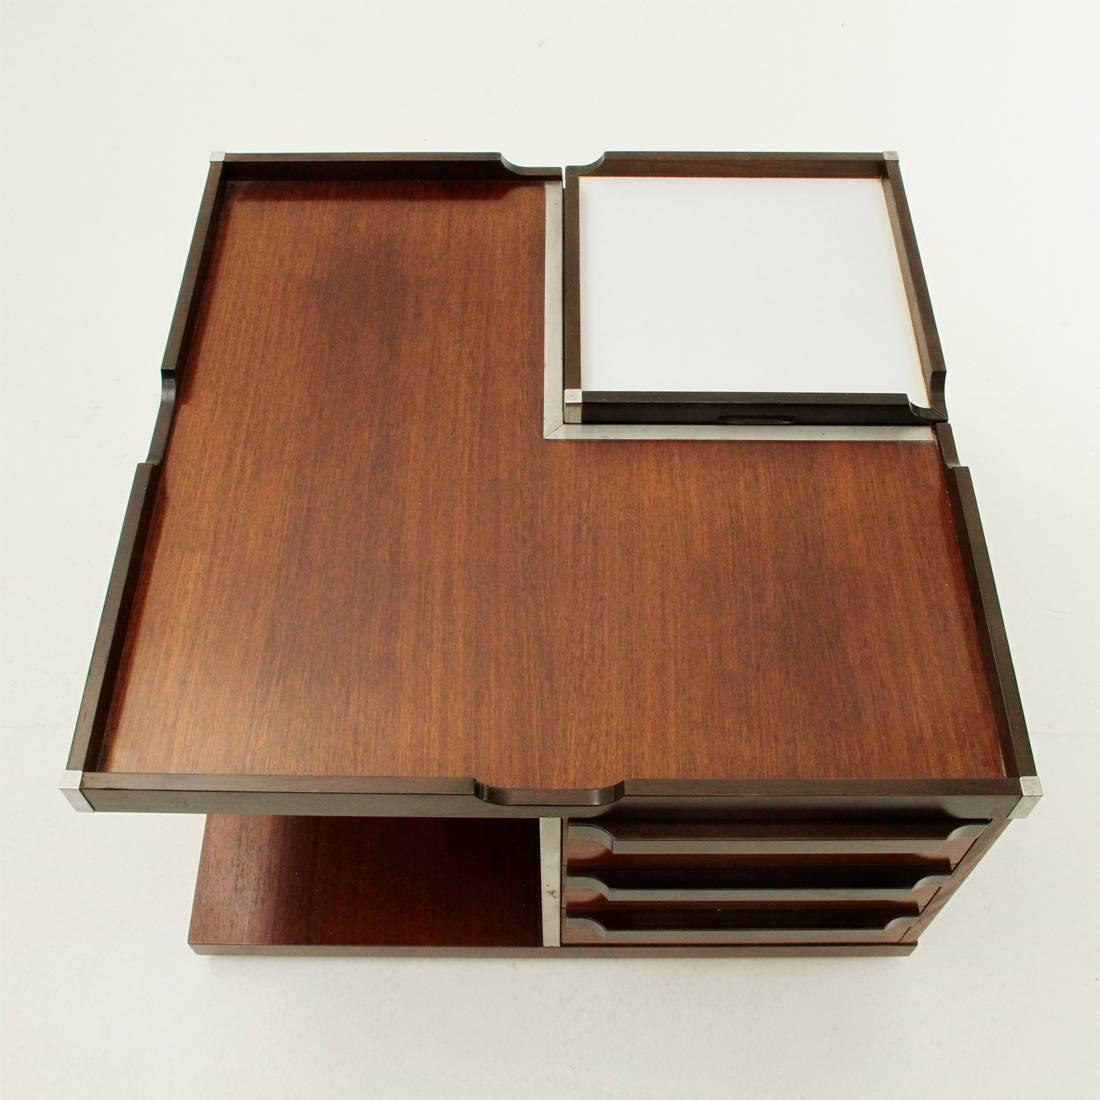 Coffee table produced by Fiarm in the 1970s.
Square table with four compartments:
One open
One closed
One with drawers,
One with upper opening for bottles. Useable cover as a tray.
Metal corners.
Good general conditions, some signs due to